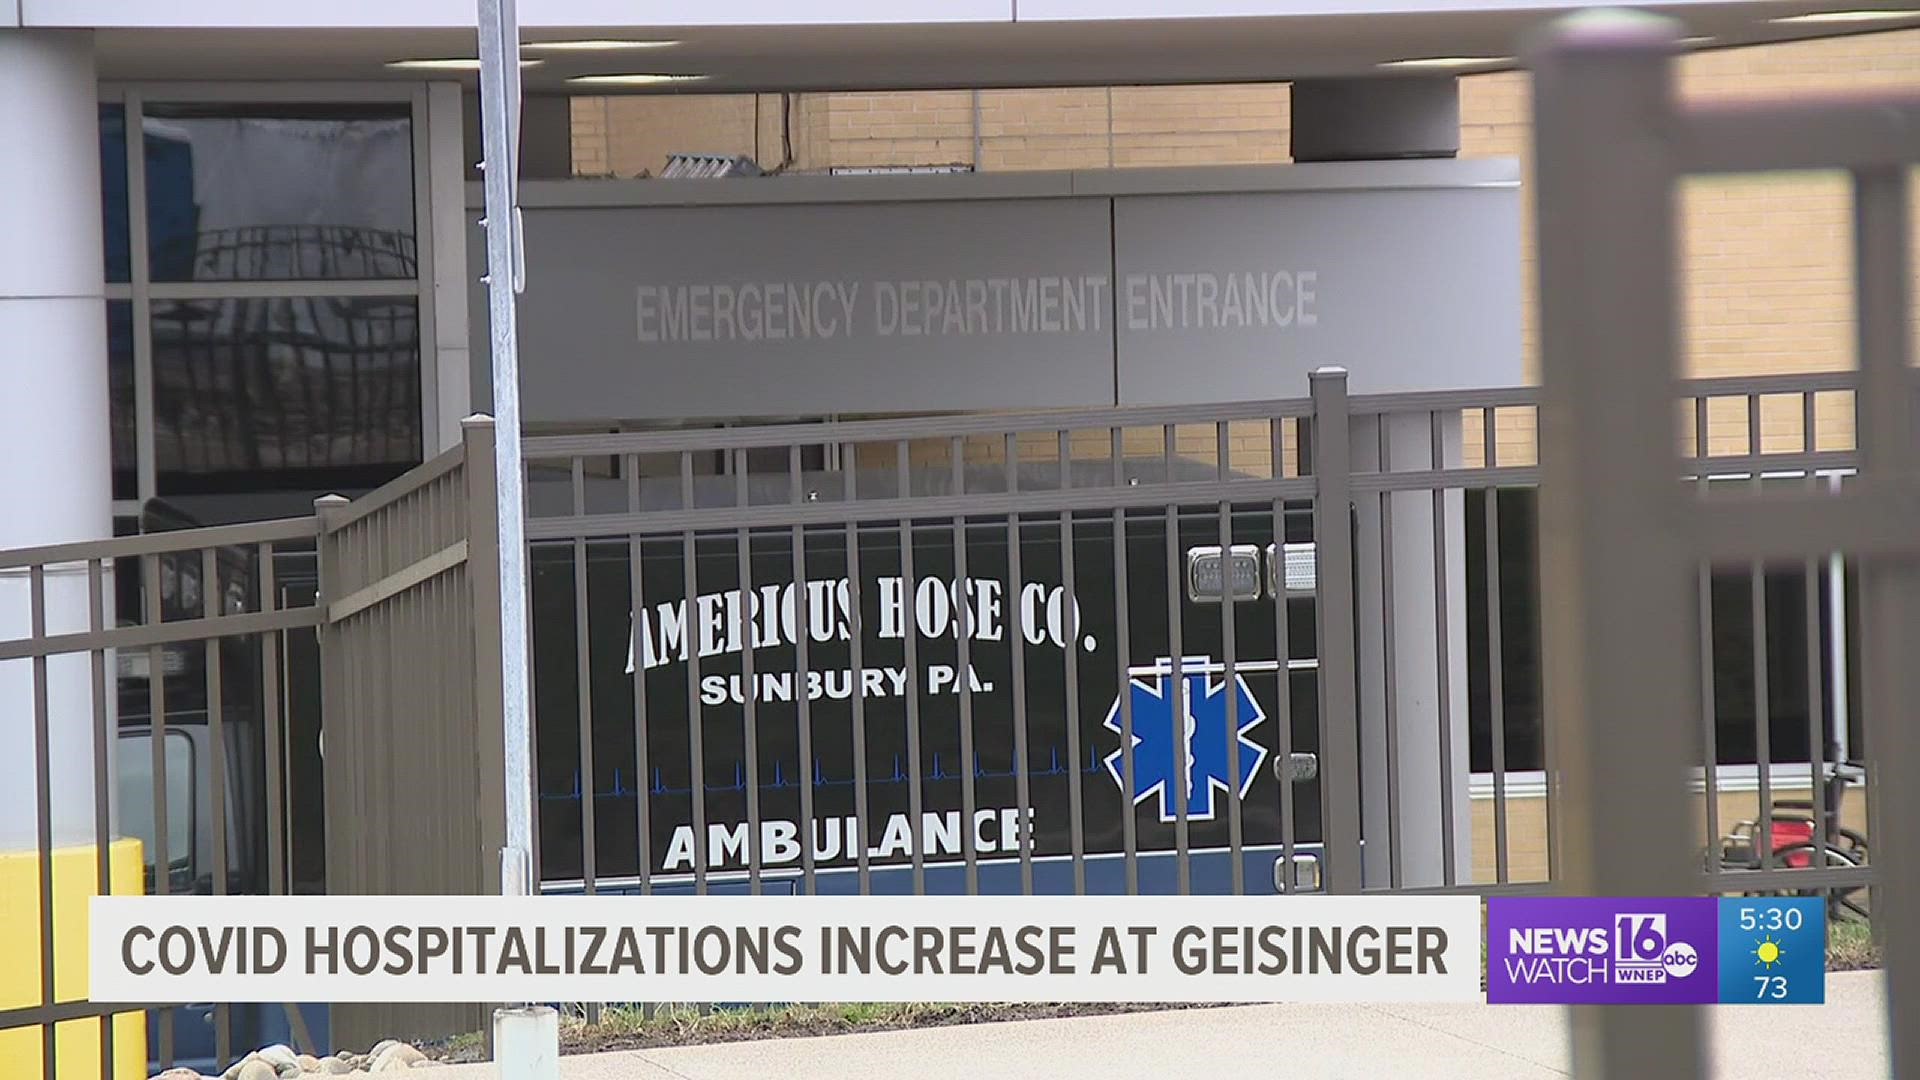 Geisinger currently has four times the number of COVID-19 hospitalizations than it did last year at this time.